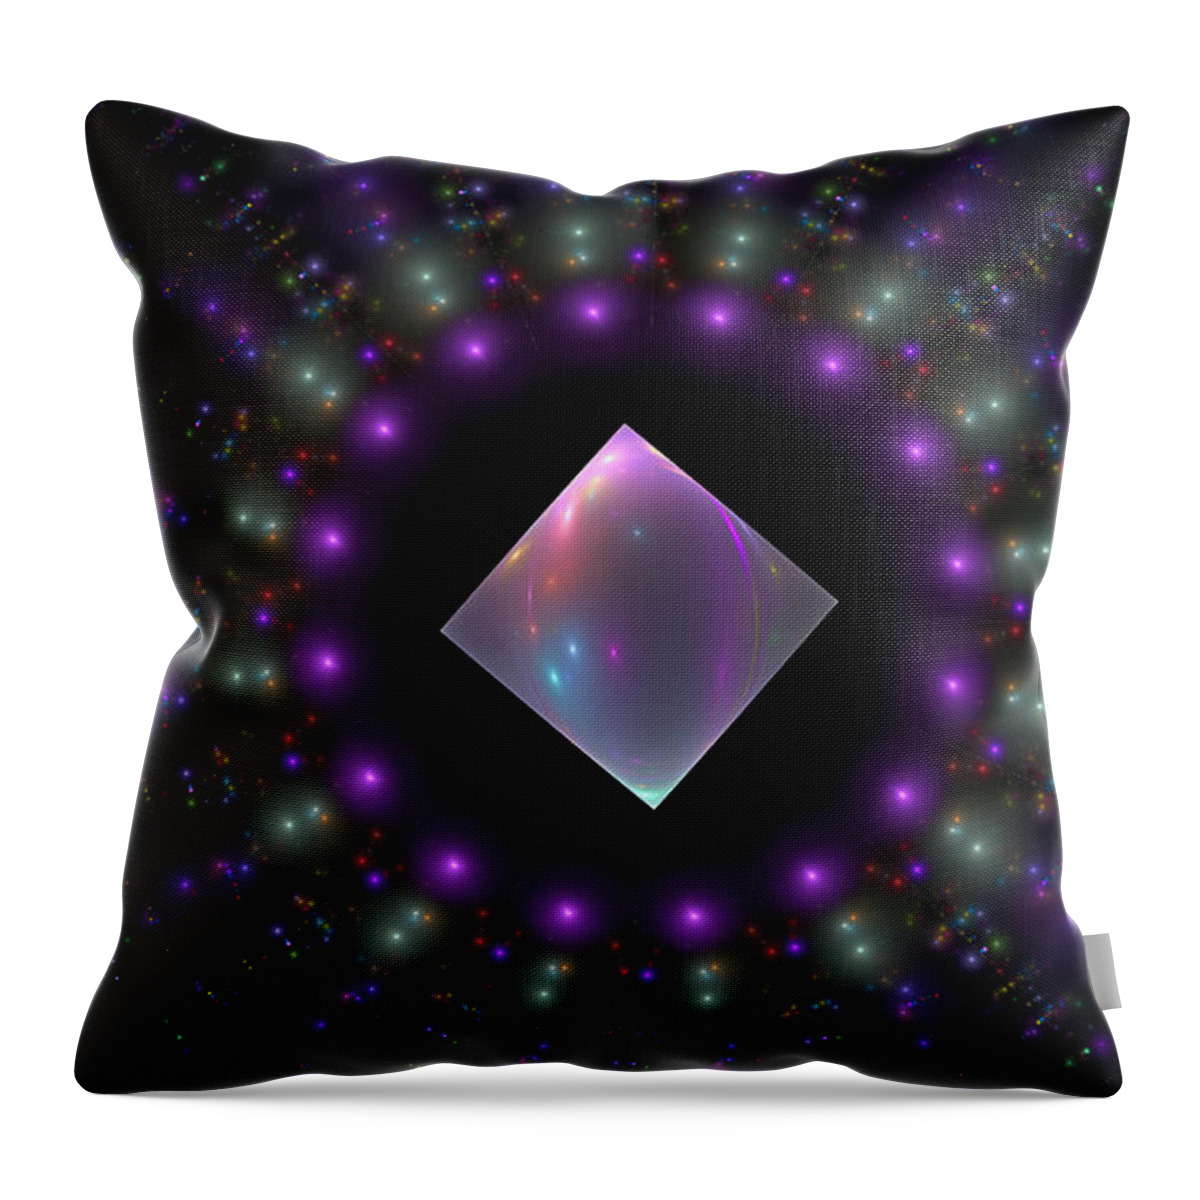 Fractal Throw Pillow featuring the digital art Square Peg Round Hole by Gary Blackman